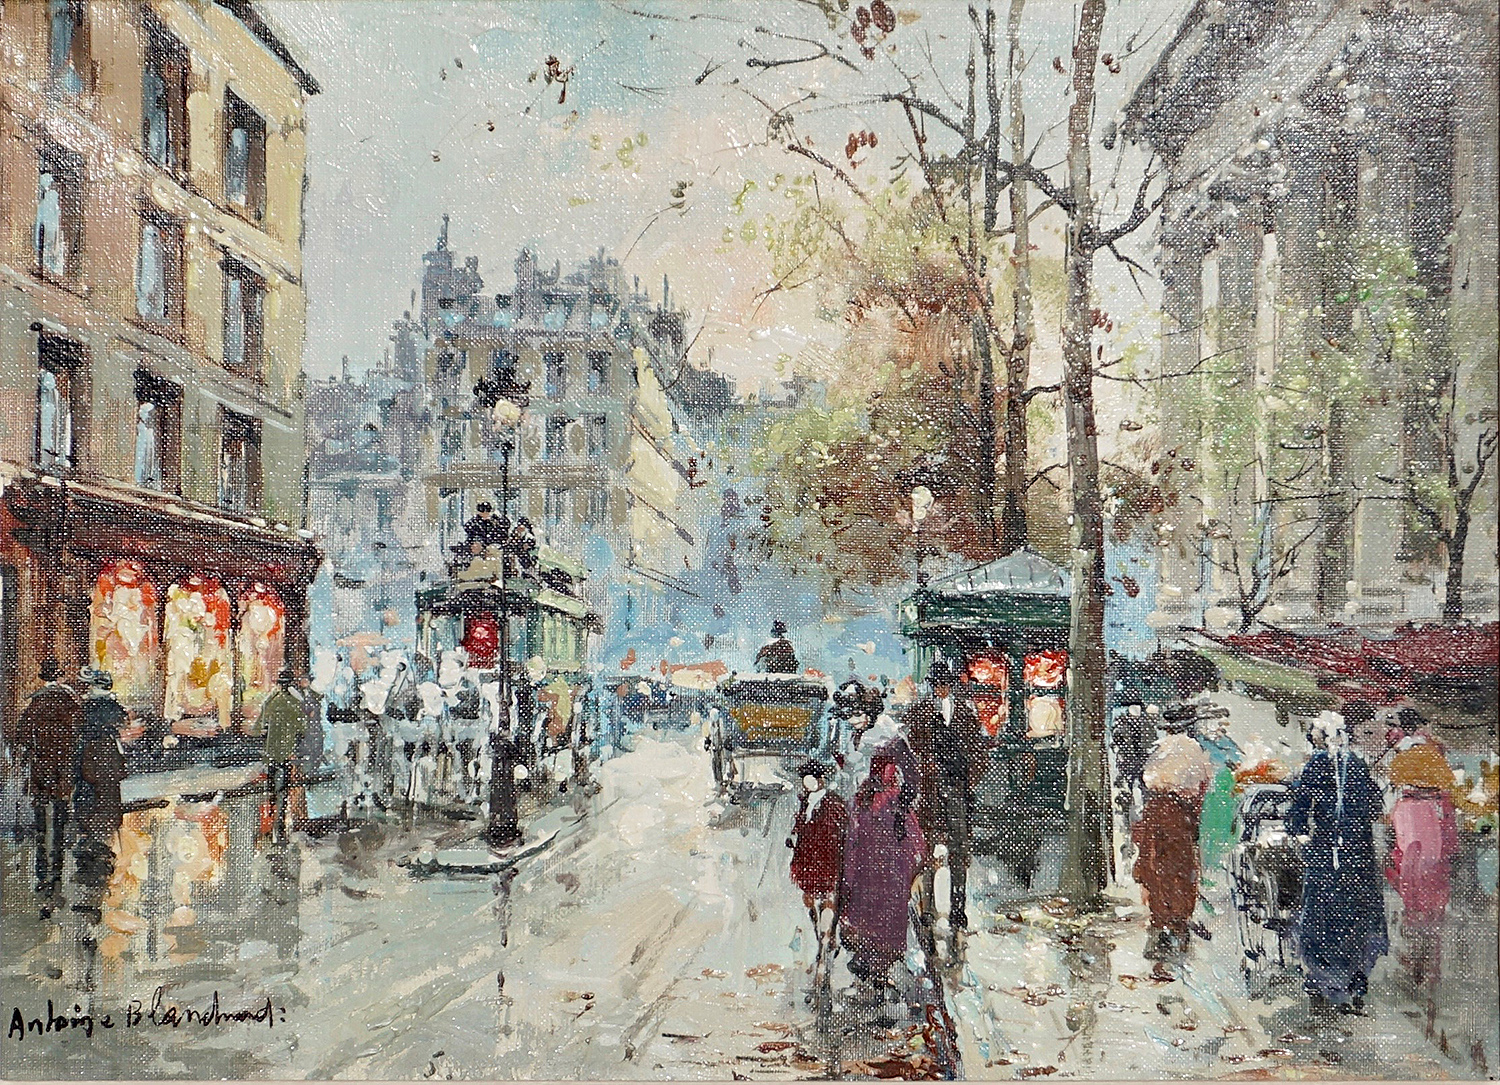 painting of the side of the Madeleine in paris with people and horses on the street